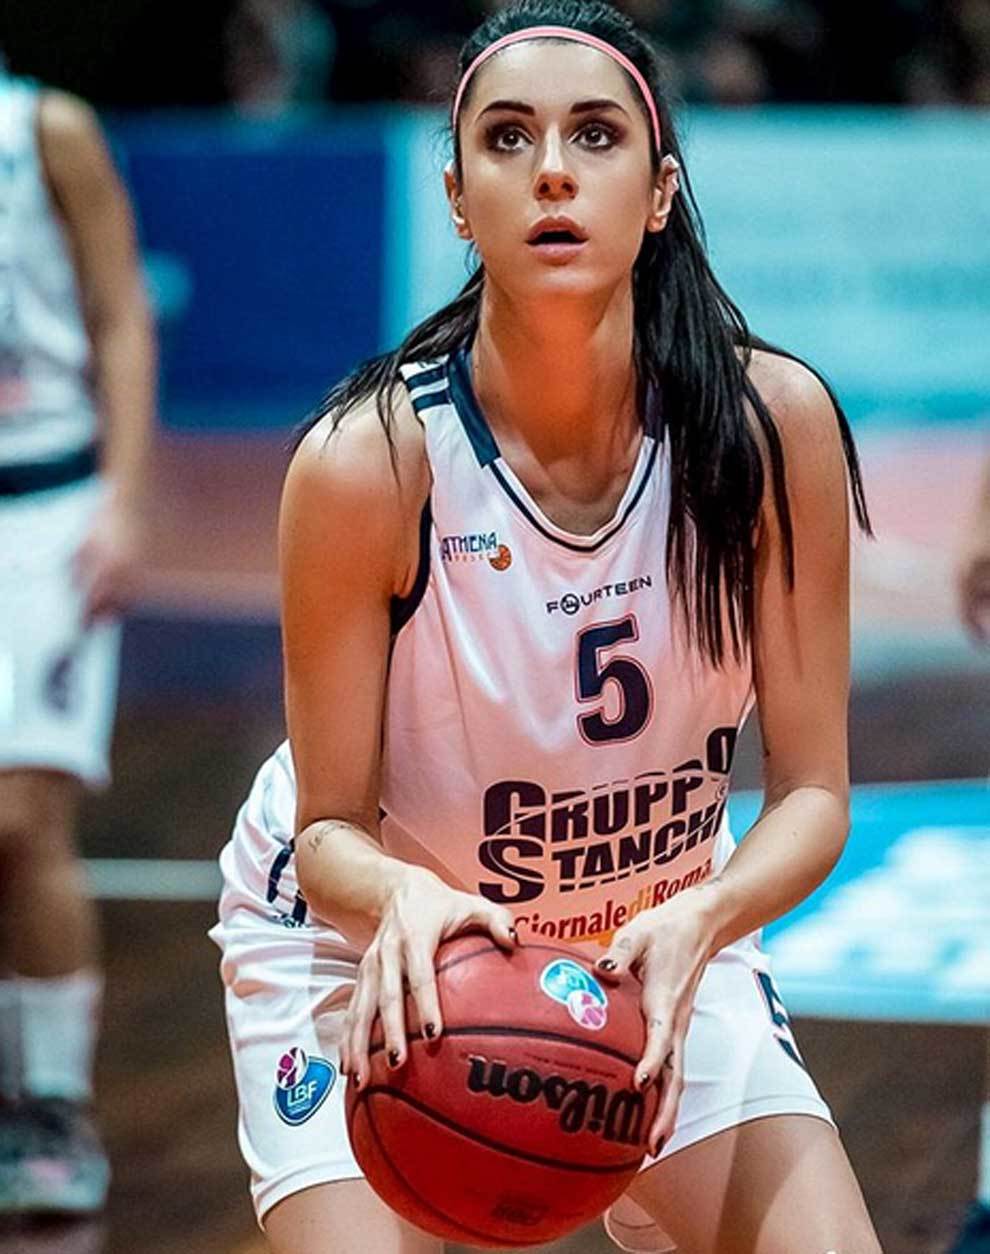 Valentina Vignali Italian Basketball Player who is Making Heads Turn with Her Jaw-Dropping Fashionable Photos